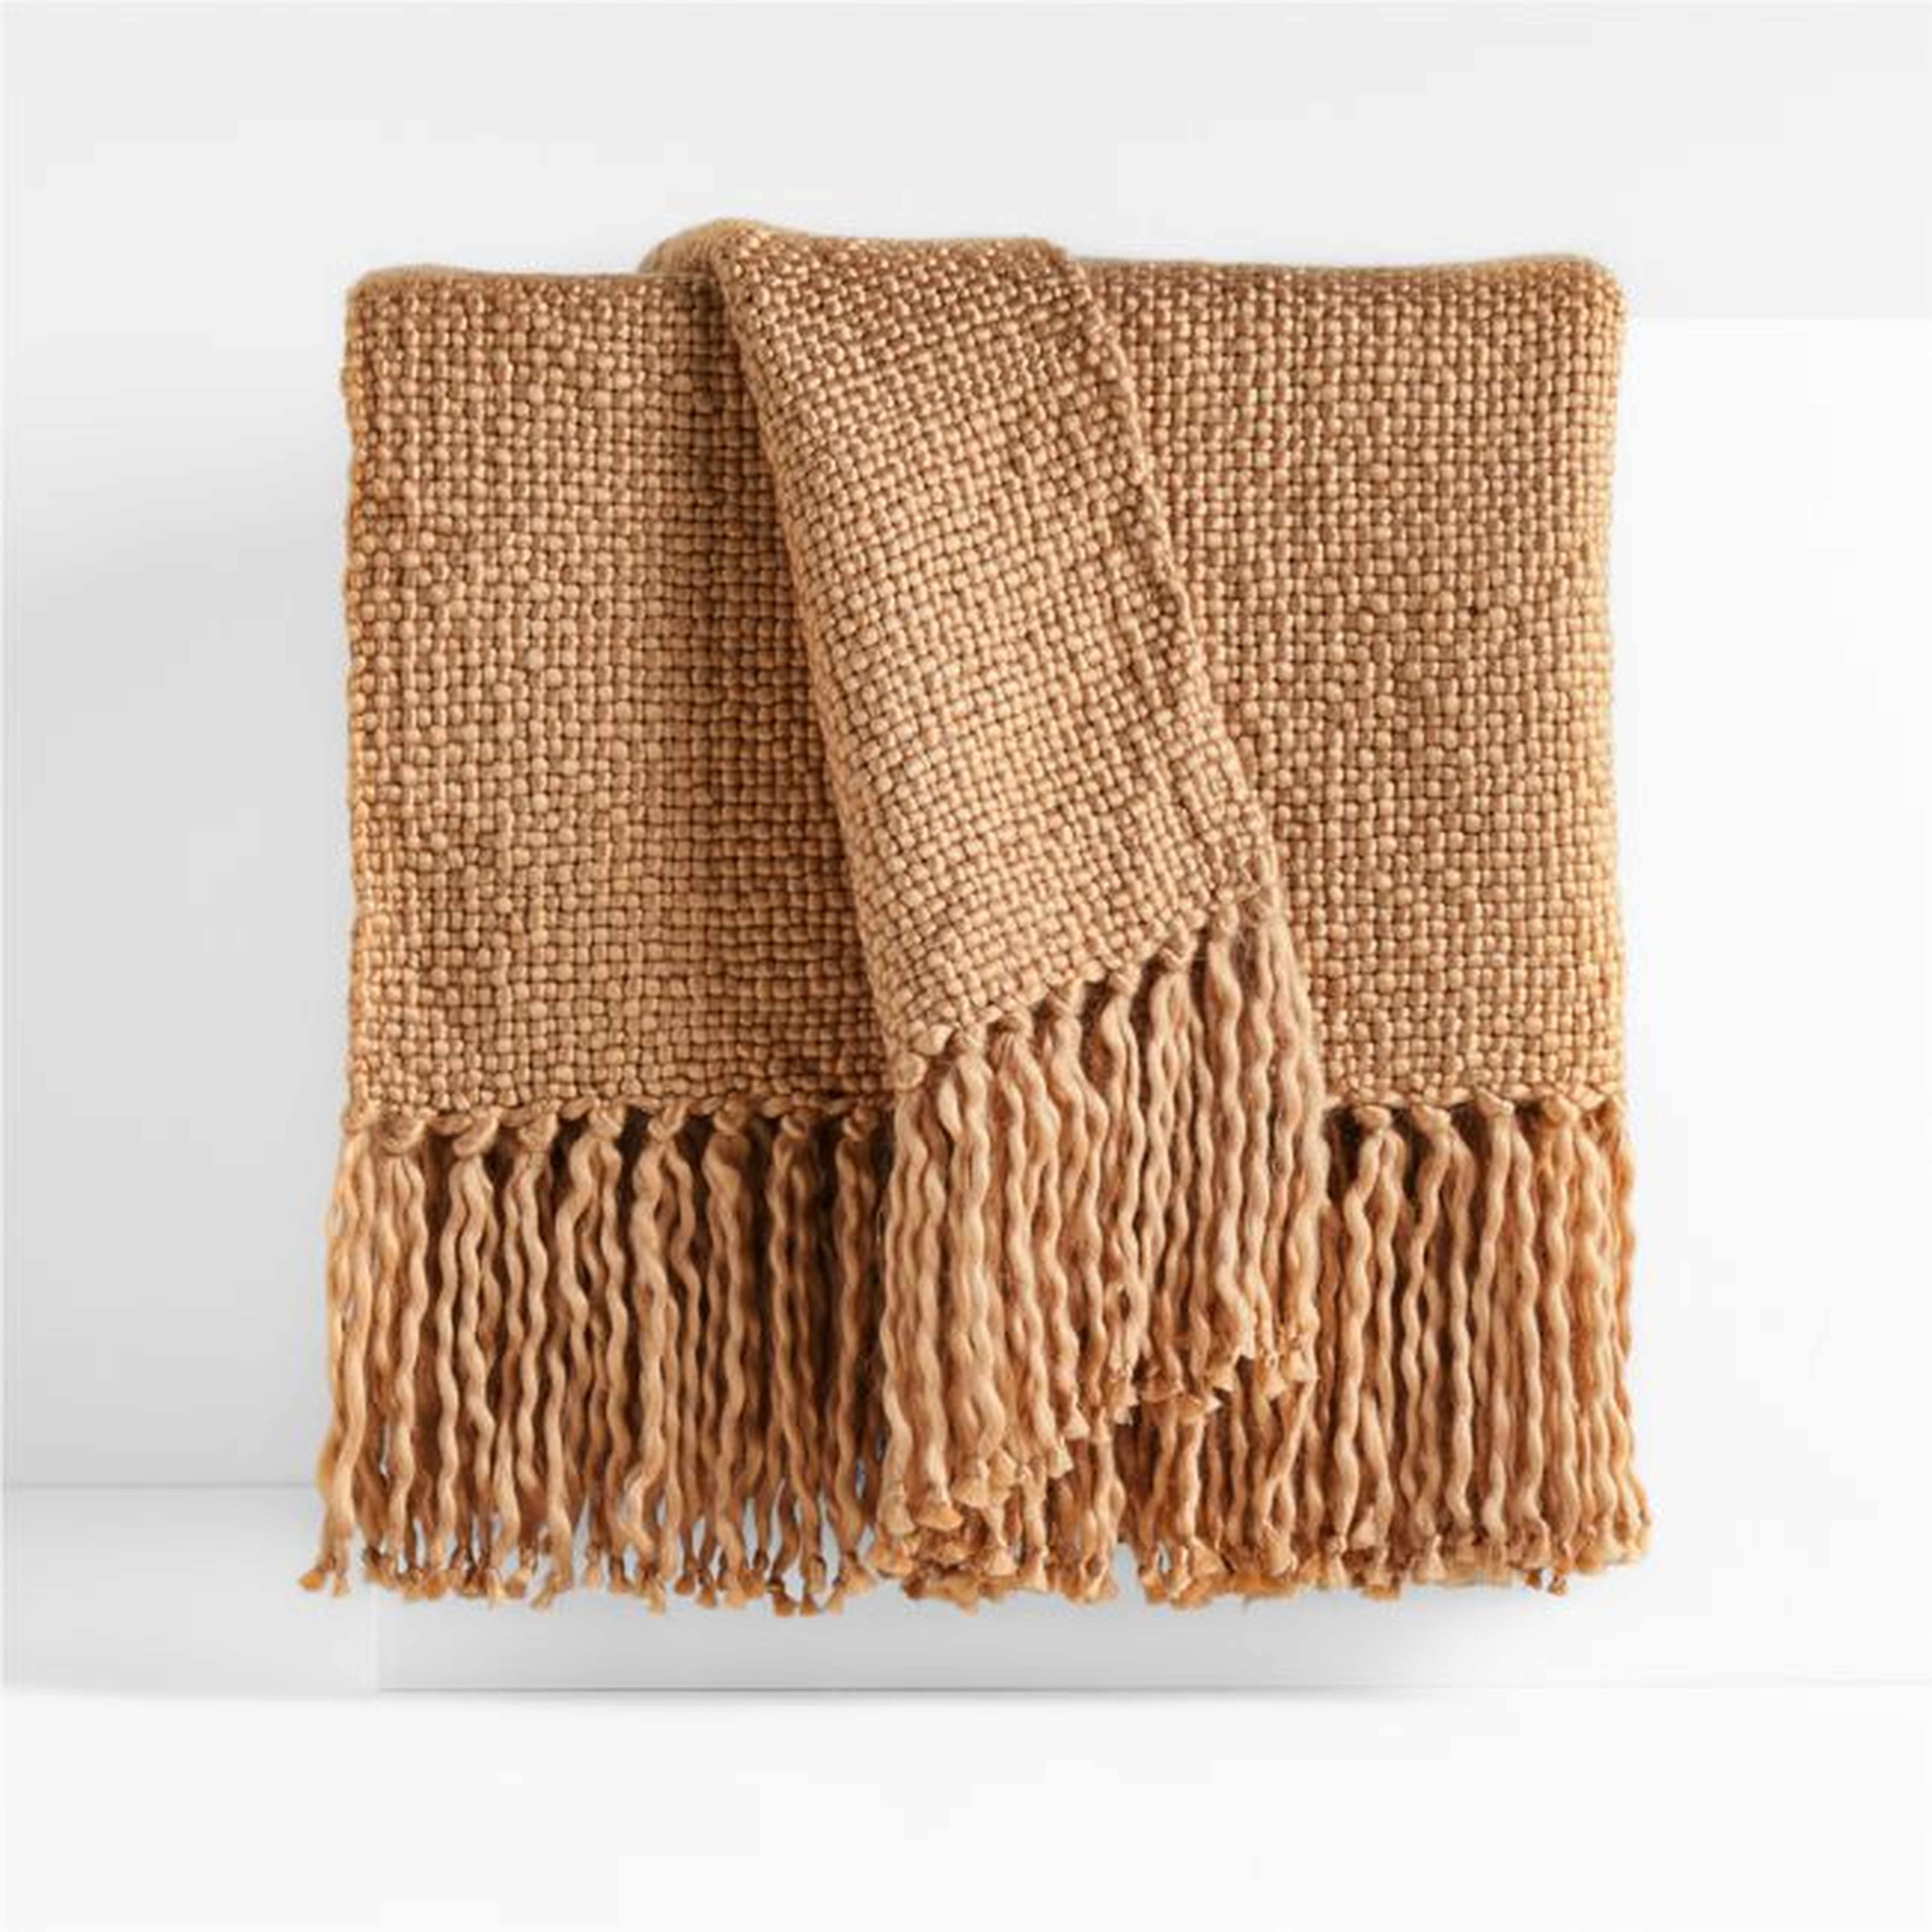 Styles 70"x55" Blush Throw Blanket - Crate and Barrel